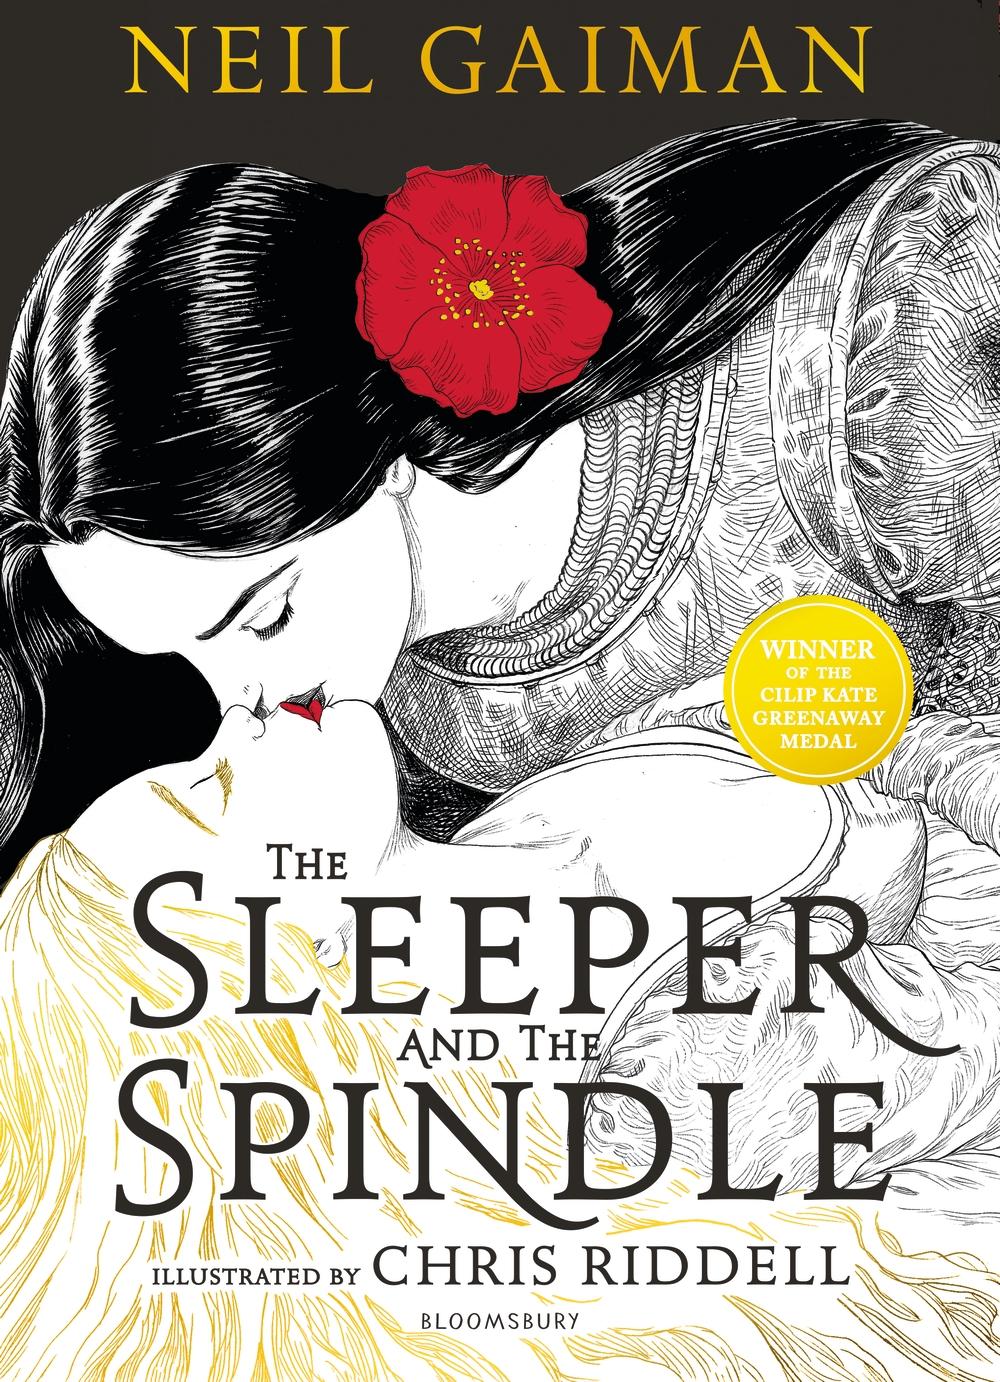 Sleeper and the Spindle - Neil Gaiman